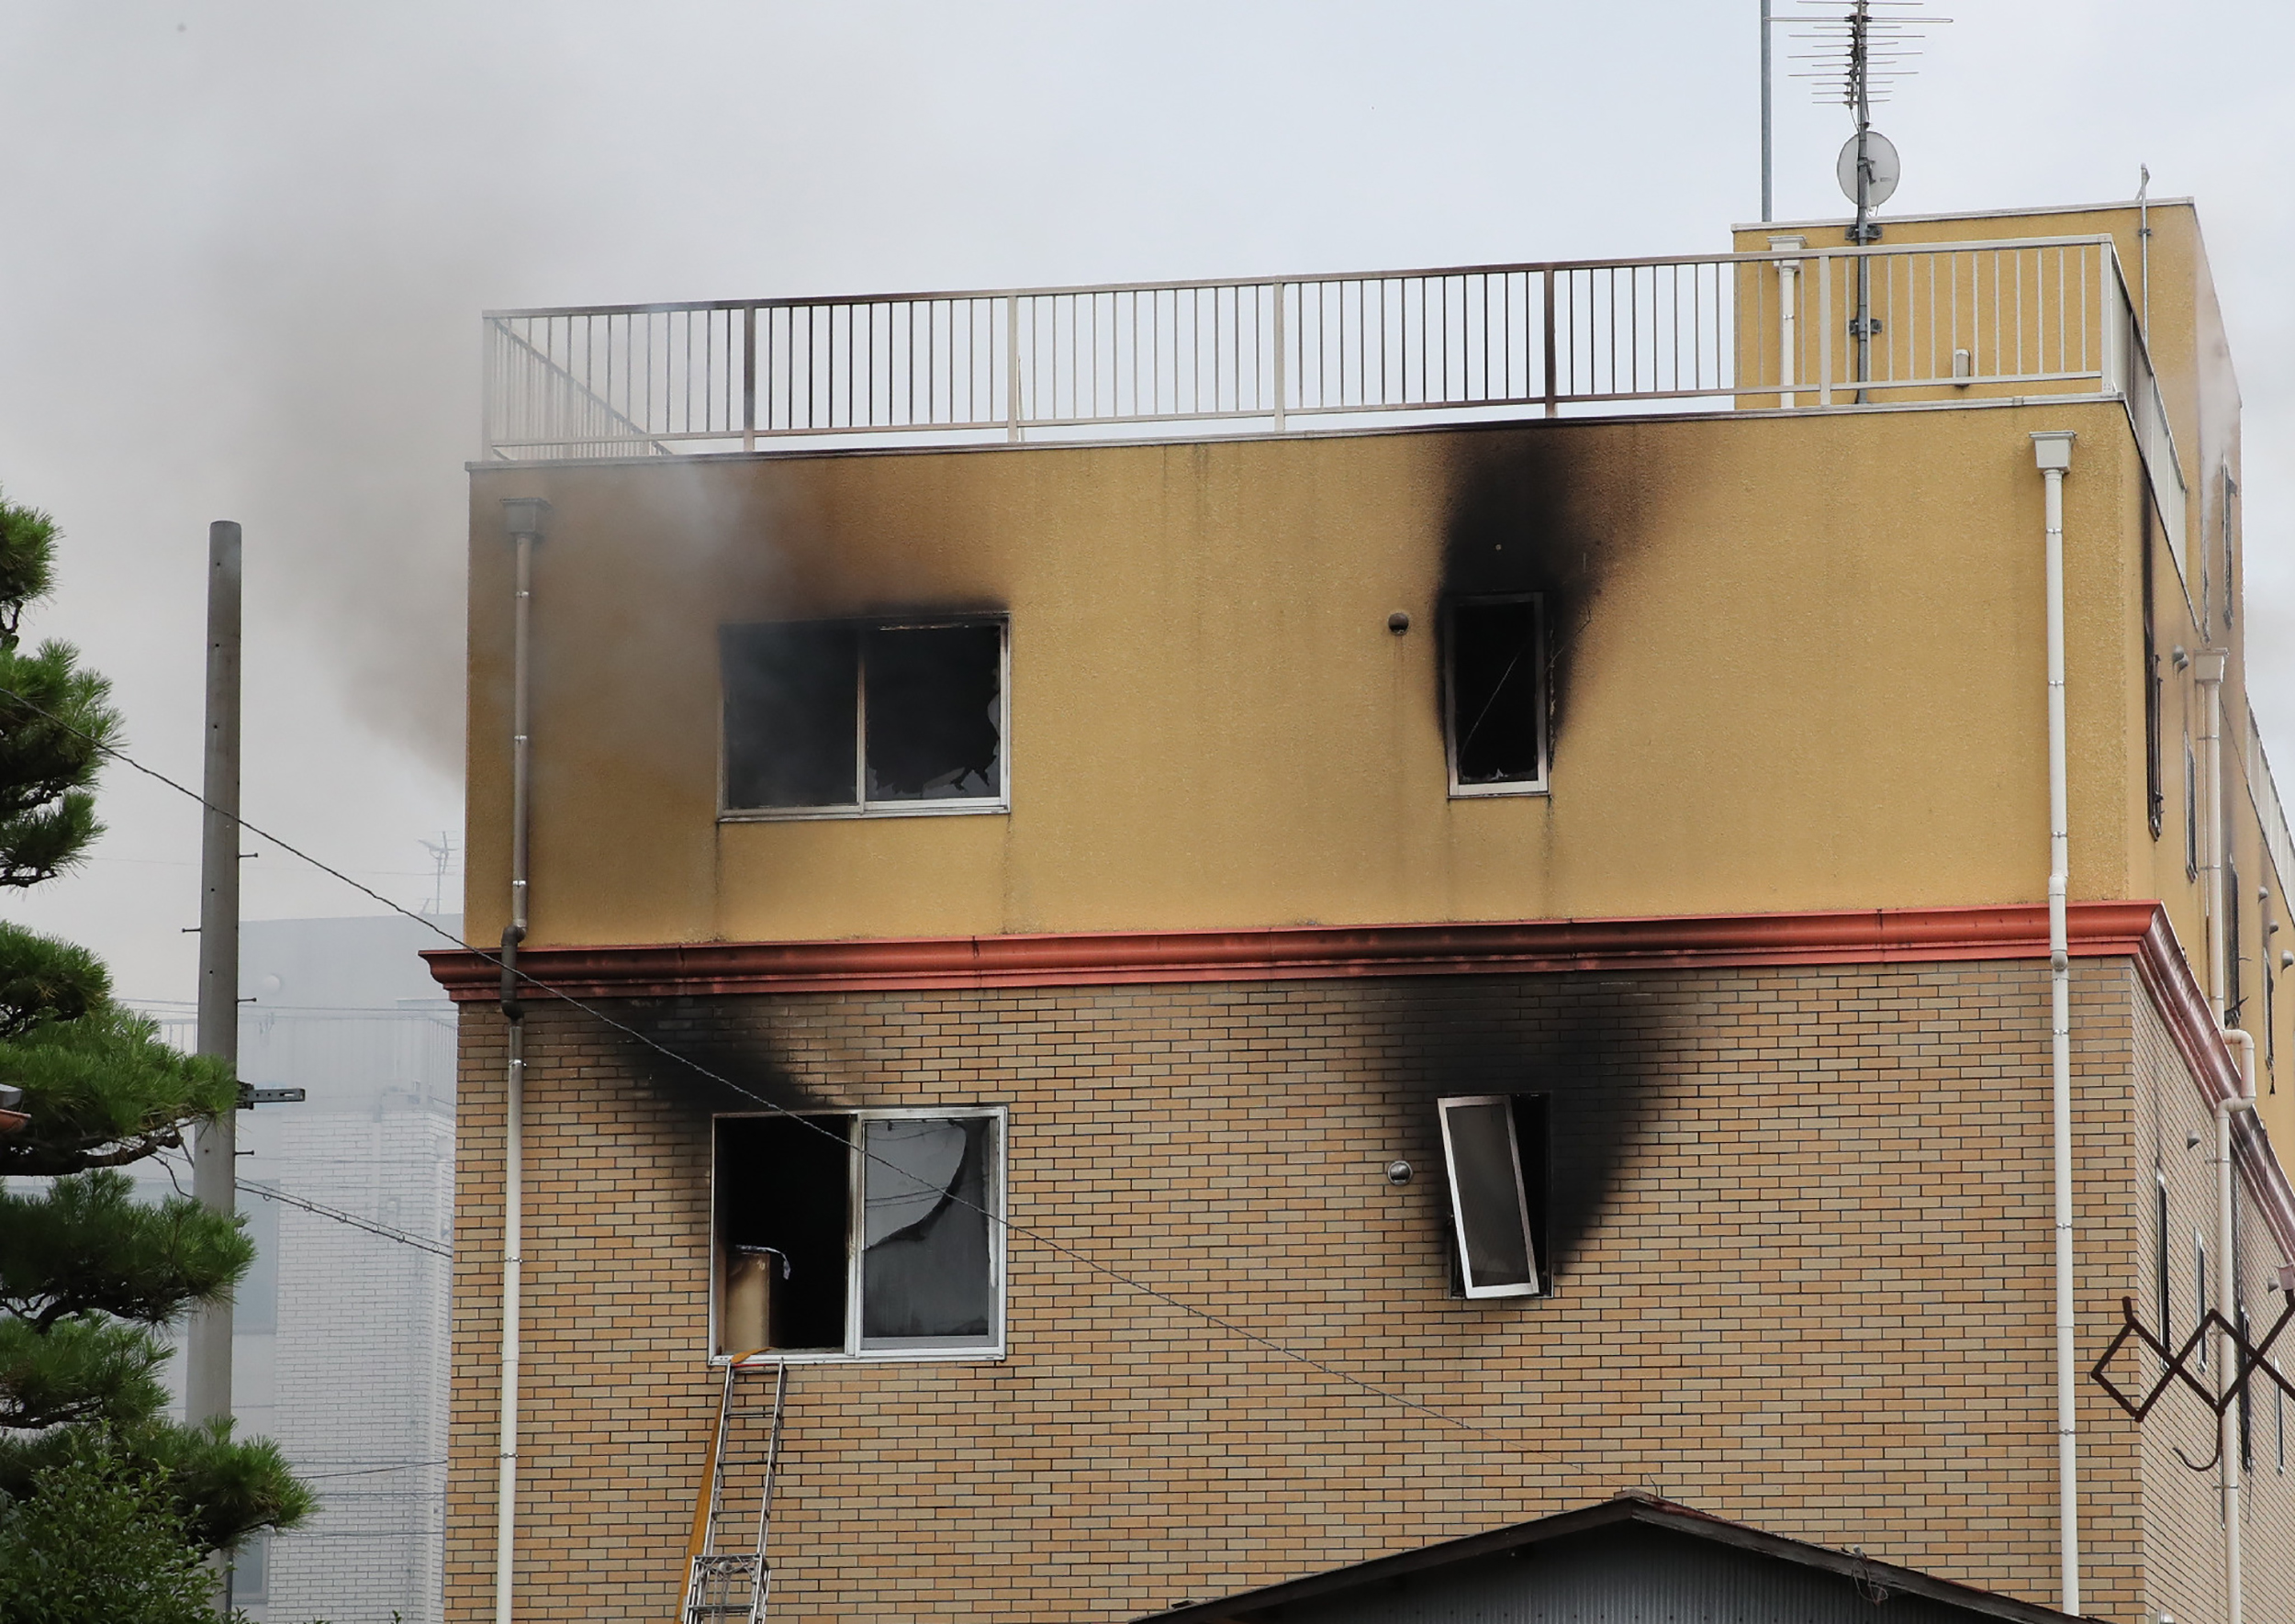 KyoAni Fire Latest: Kyoto Animation Fans Post Messages of Support After  Deadly Arson Attack on Studio